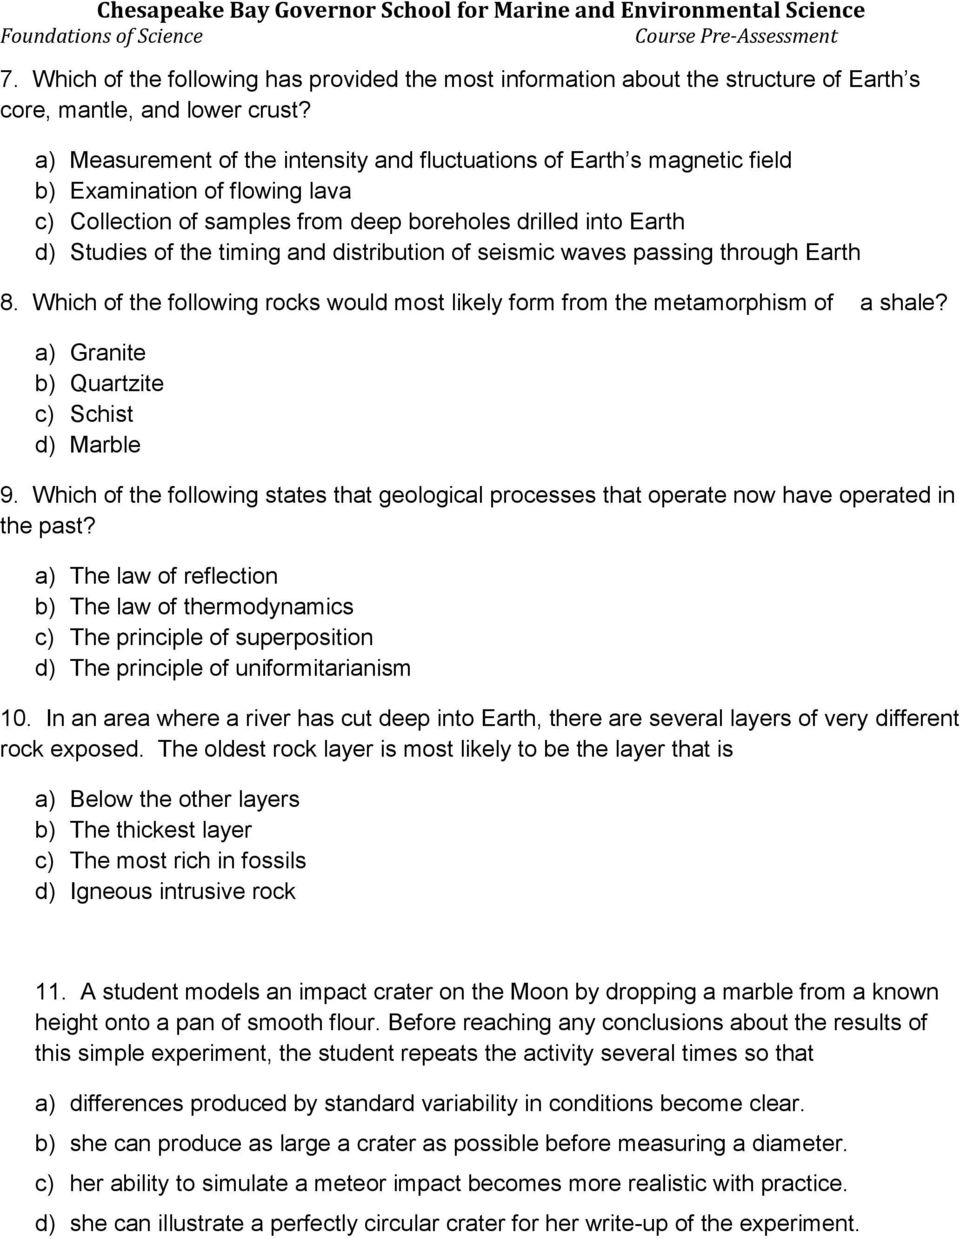 distribution of seismic waves passing through Earth 8. Which of the following rocks would most likely form from the metamorphism of a shale? a) Granite b) Quartzite c) Schist d) Marble 9.